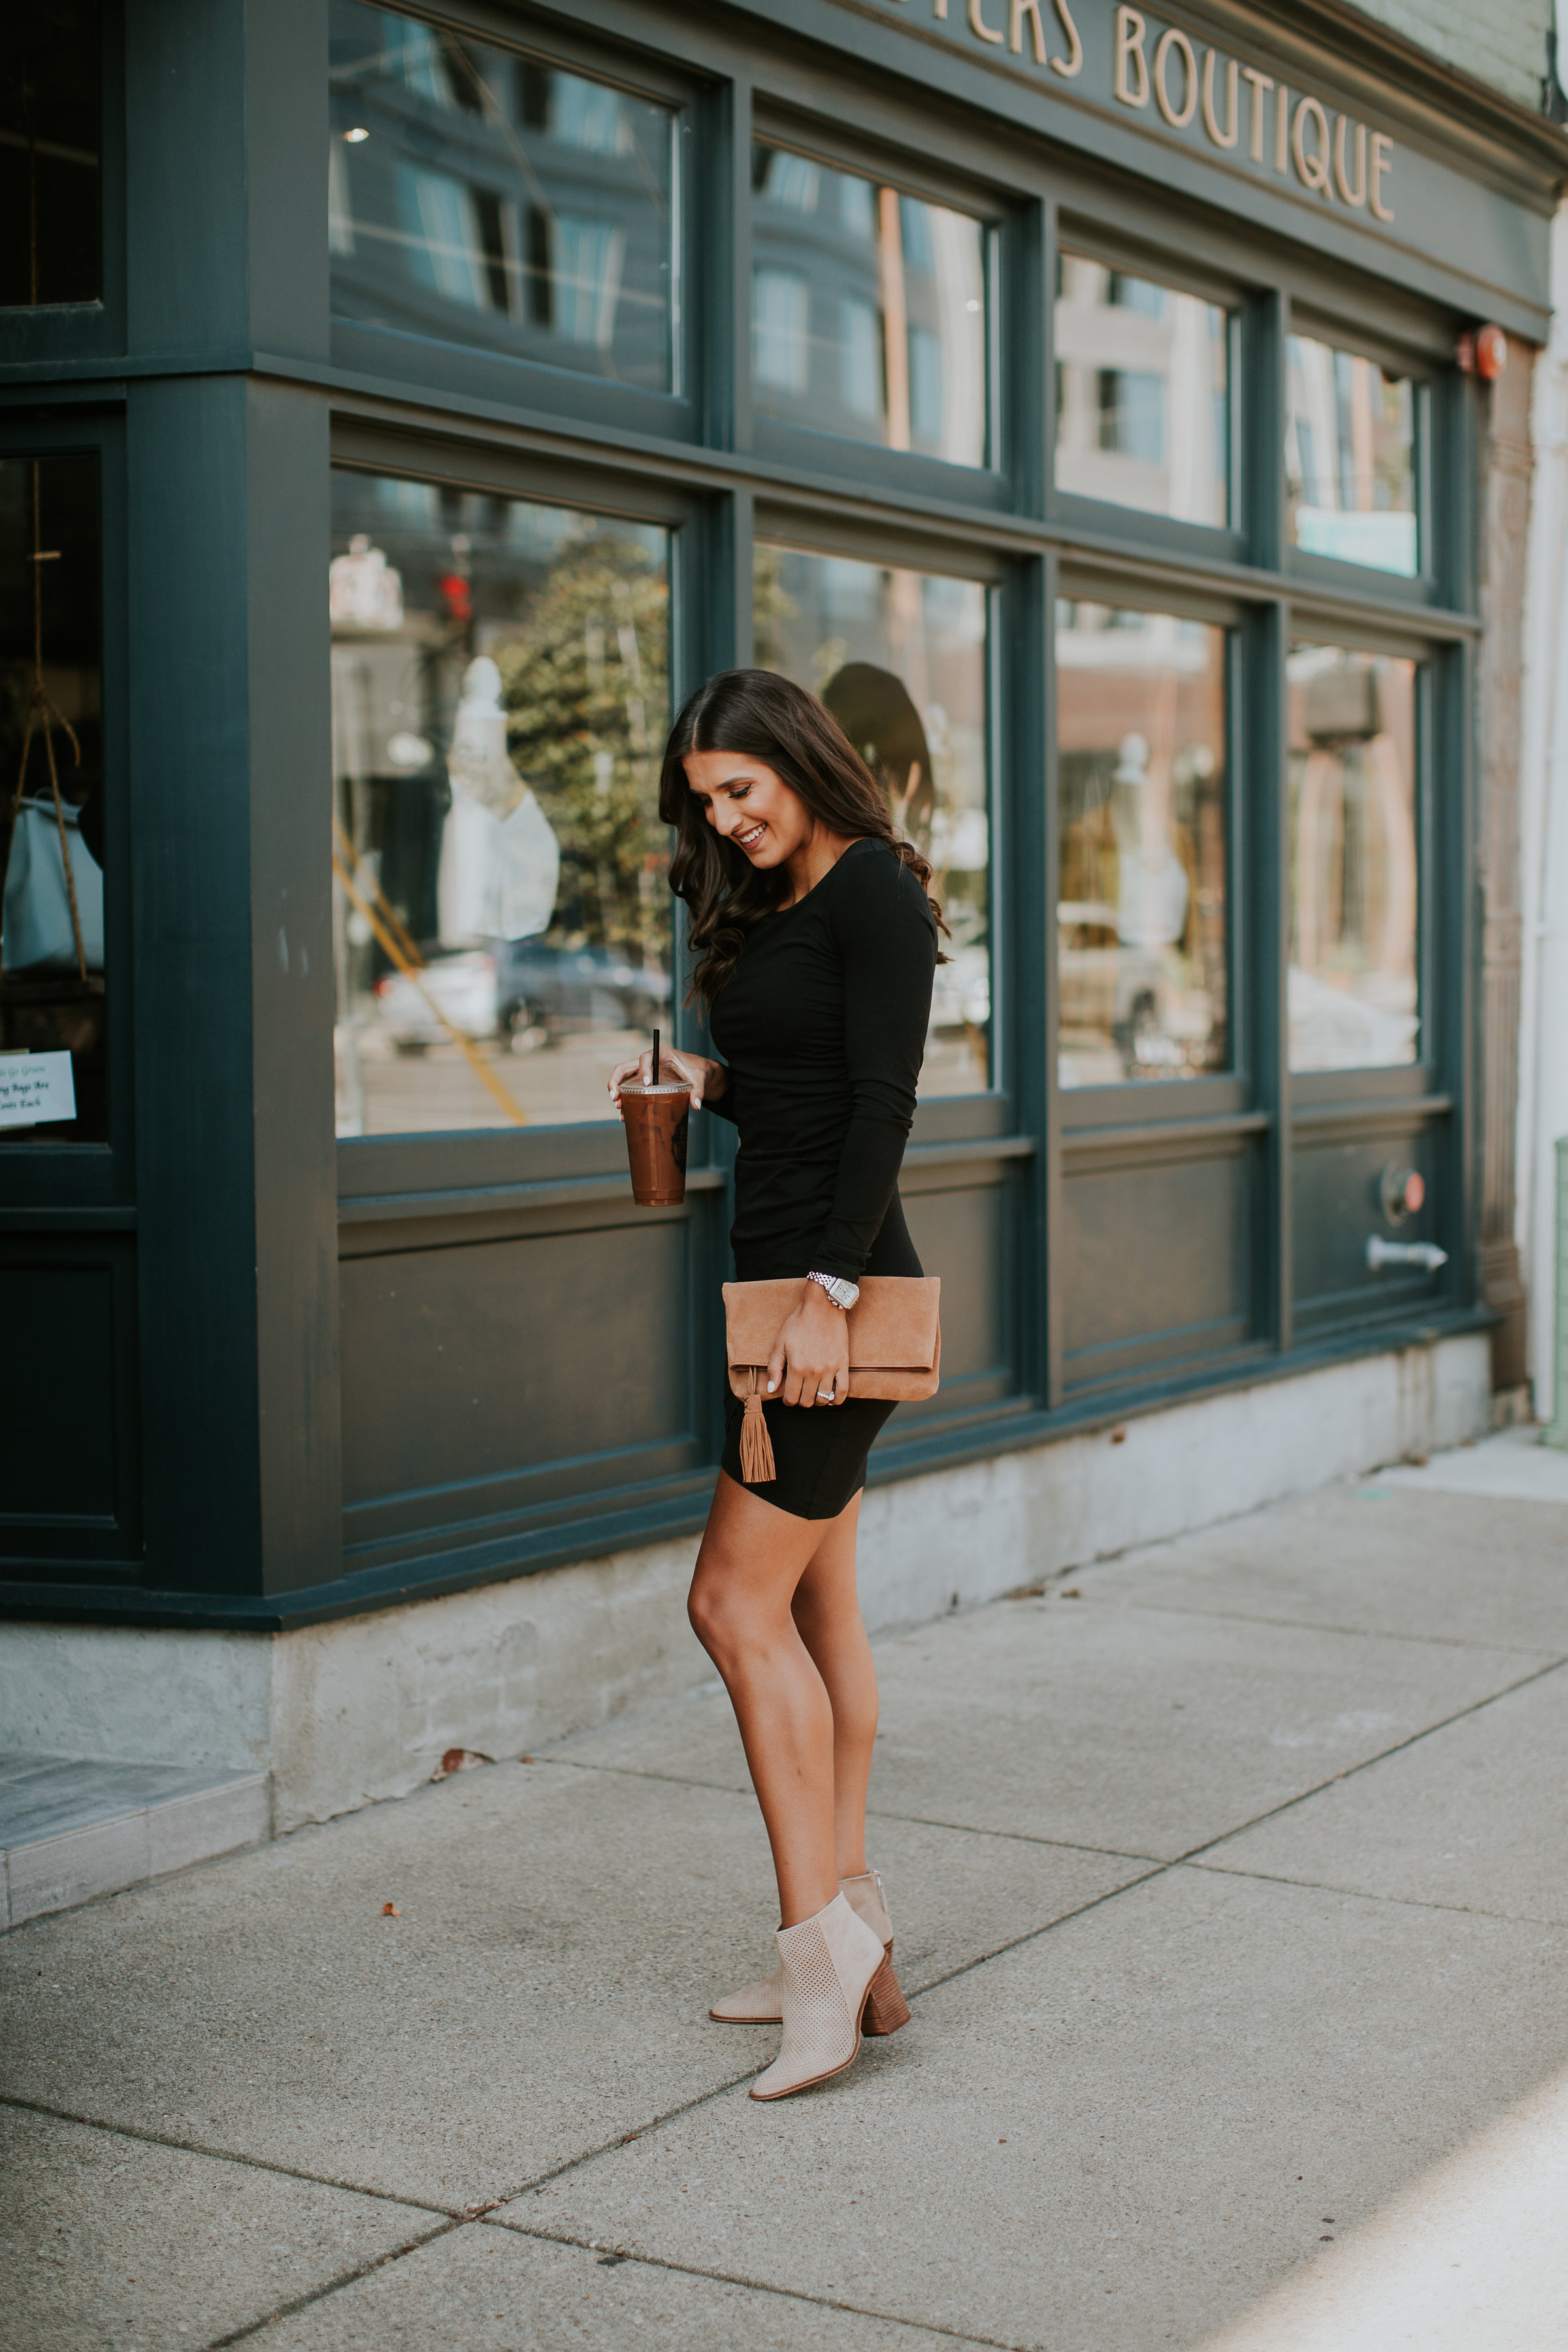 ruched long sleeve dress, ruched dress, leith dress, leith ruched dress, leith foldover clutch, suede foldover clutch, fall booties, steve madden booties, steve madden boots, perforated booties, fall style, fall fashion, fall boots, fall inspo, nordstrom outfit, cute fall outfit // grace wainwright grace white a southern drawl